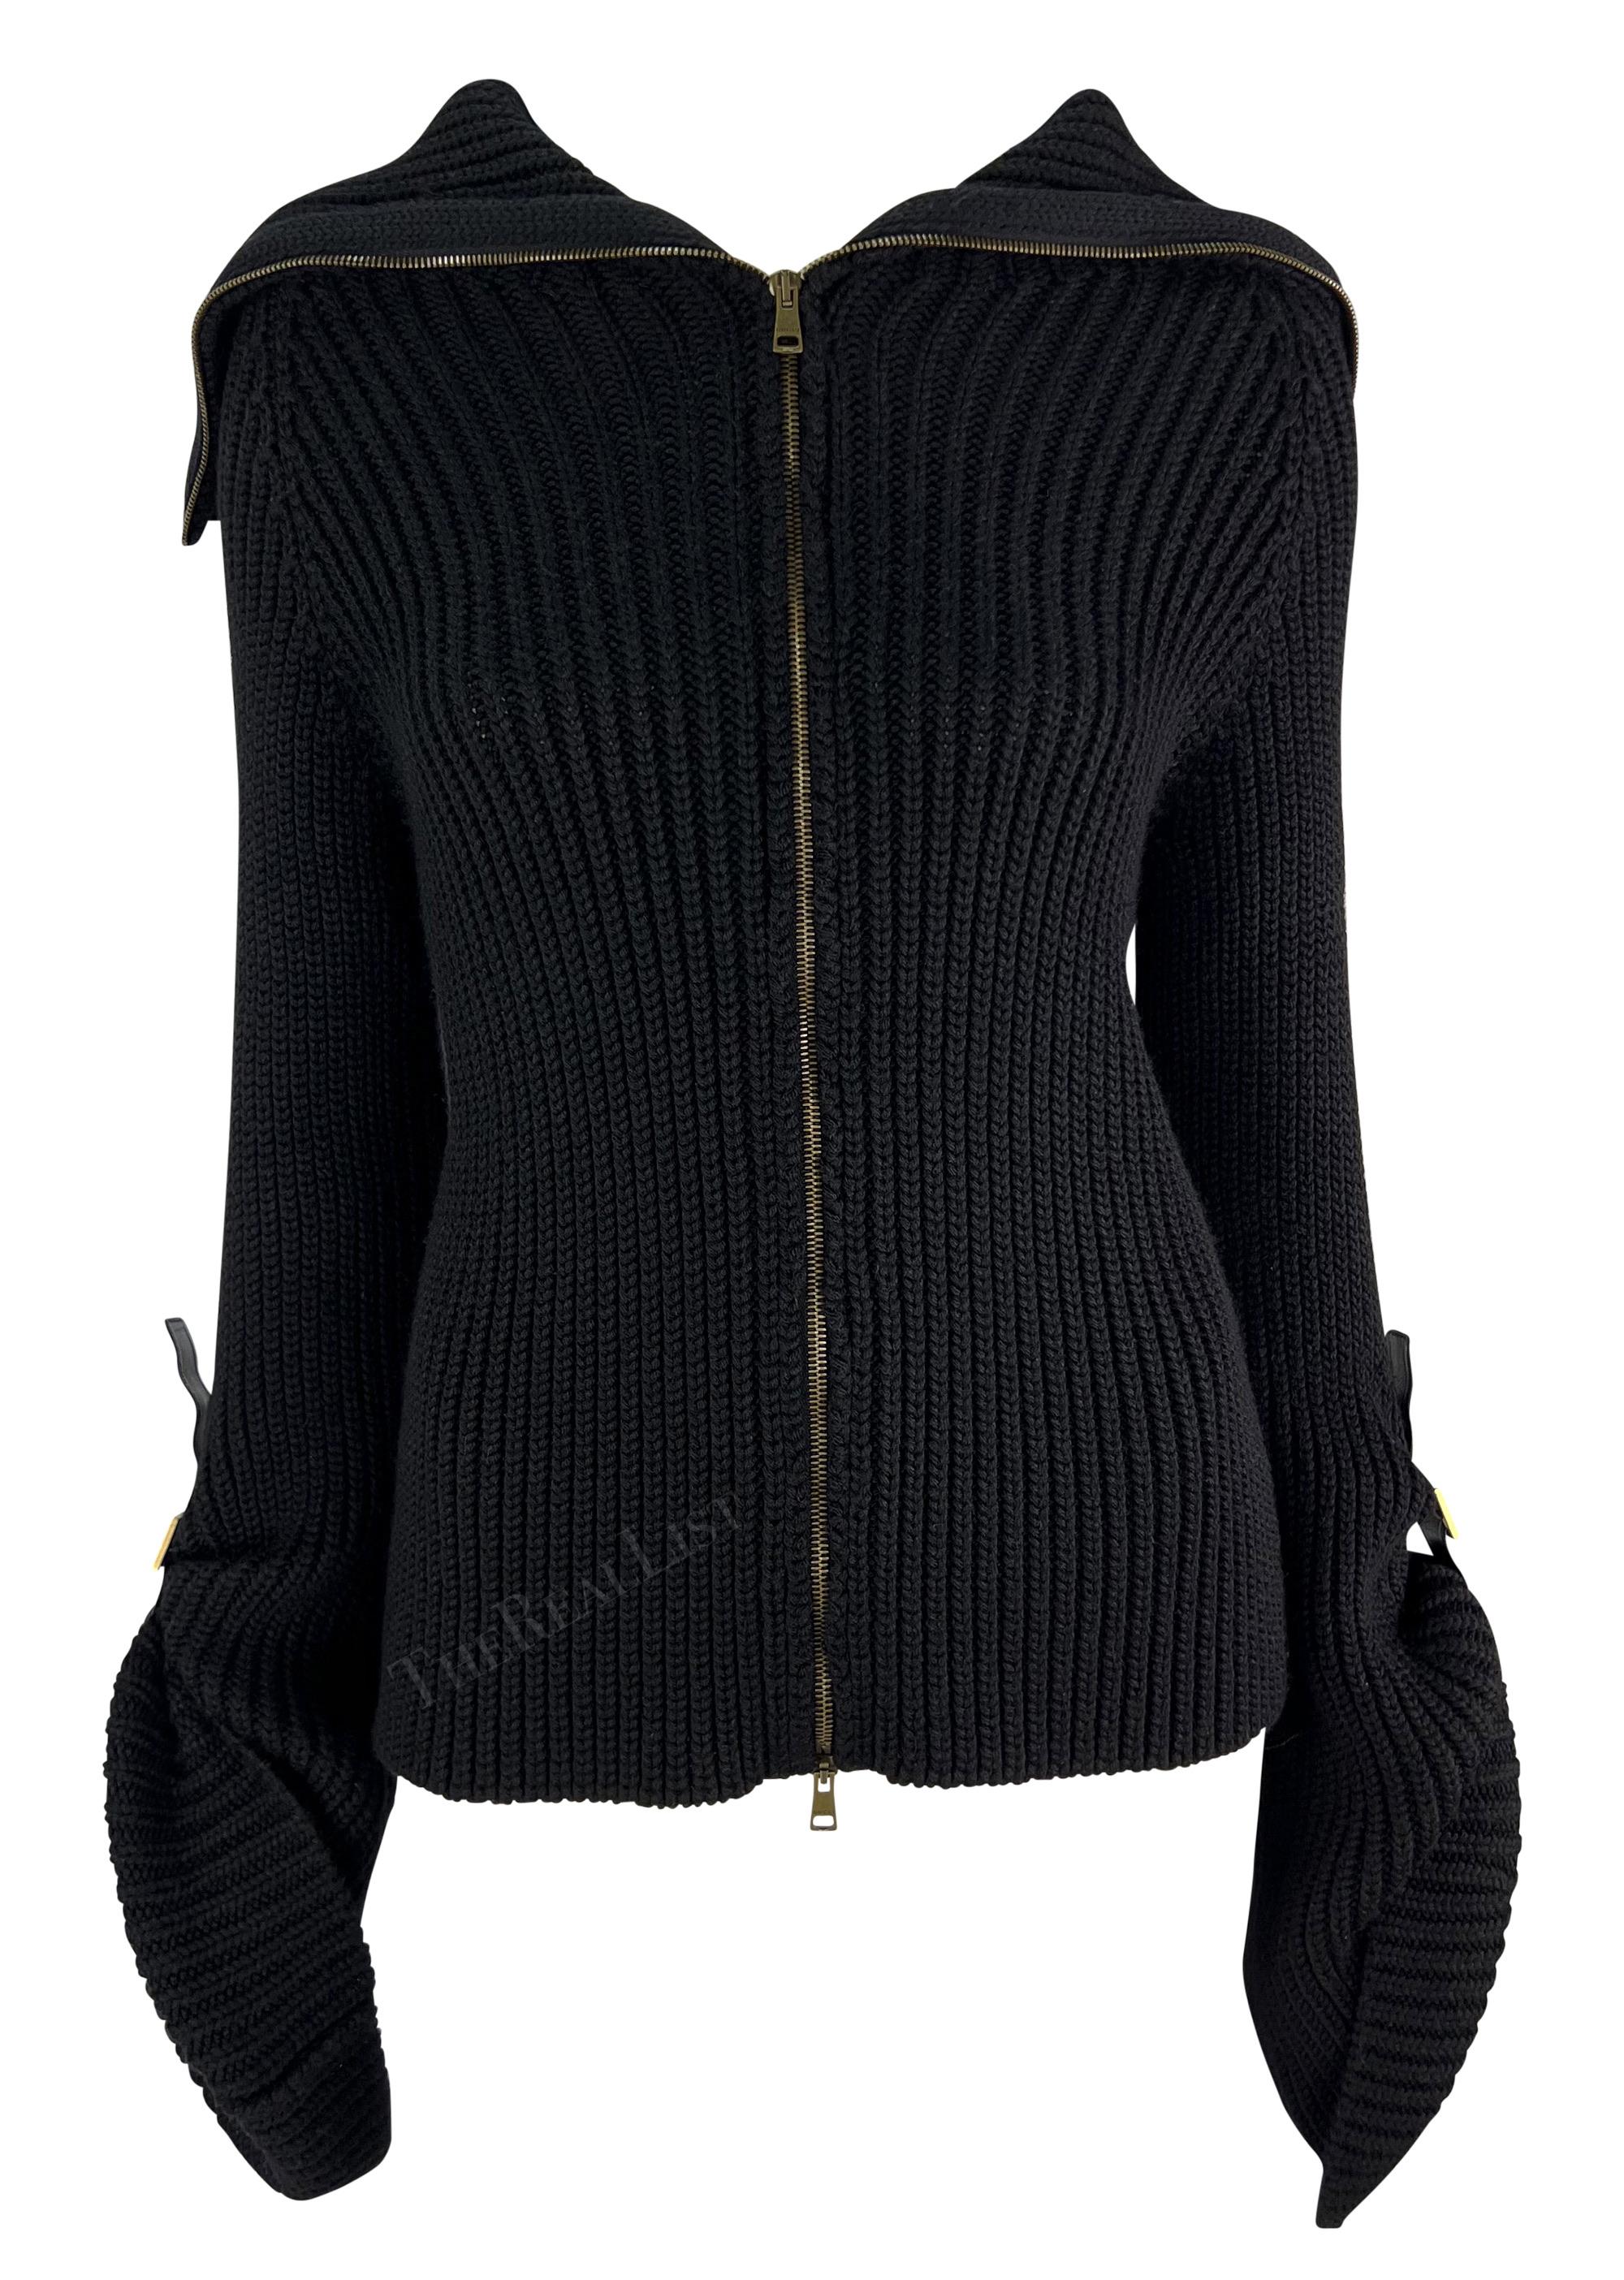 TheRealList presents: a fabulous black knit Gucci sweater, designed by Tom Ford. From the Fall/Winter 2003 collection, this stylish sweater has a front zip-up closure, a fold-over collar with a leather buckle, and eye-catching large bell sleeves.